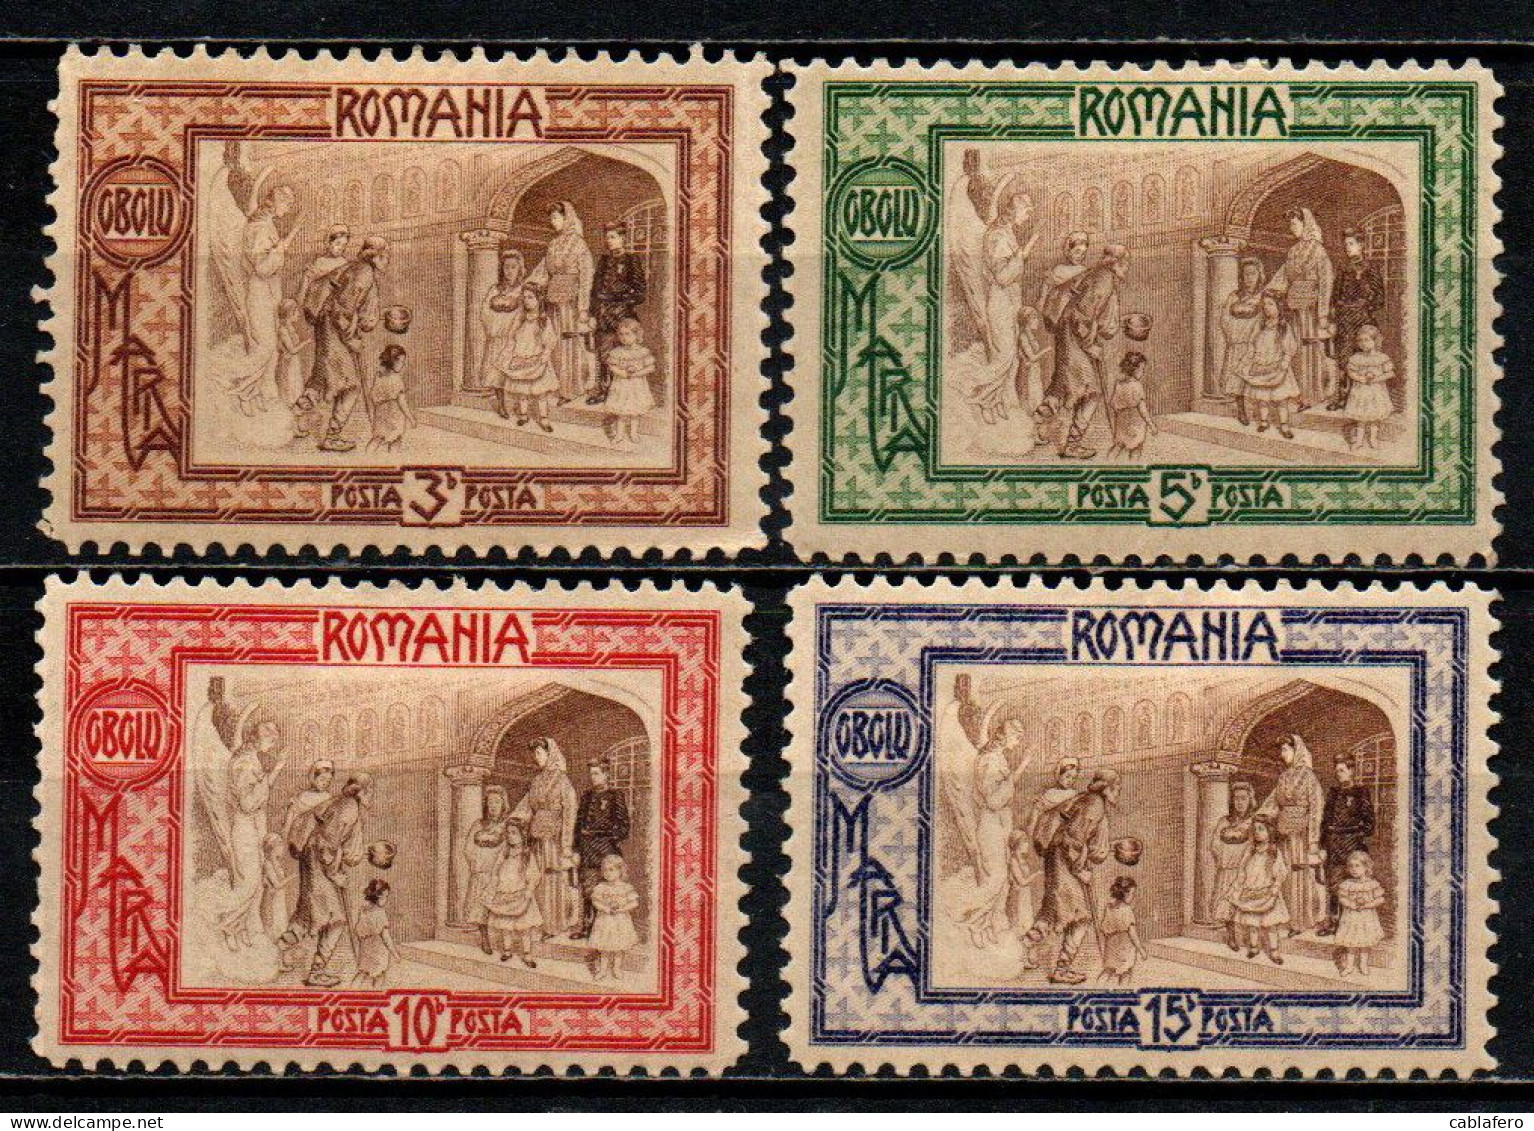 ROMANIA - 1907 - Guardian Angel Bringing Poor To Crown Princess Marie - SERIE COMPLETA - MH - Ungebraucht